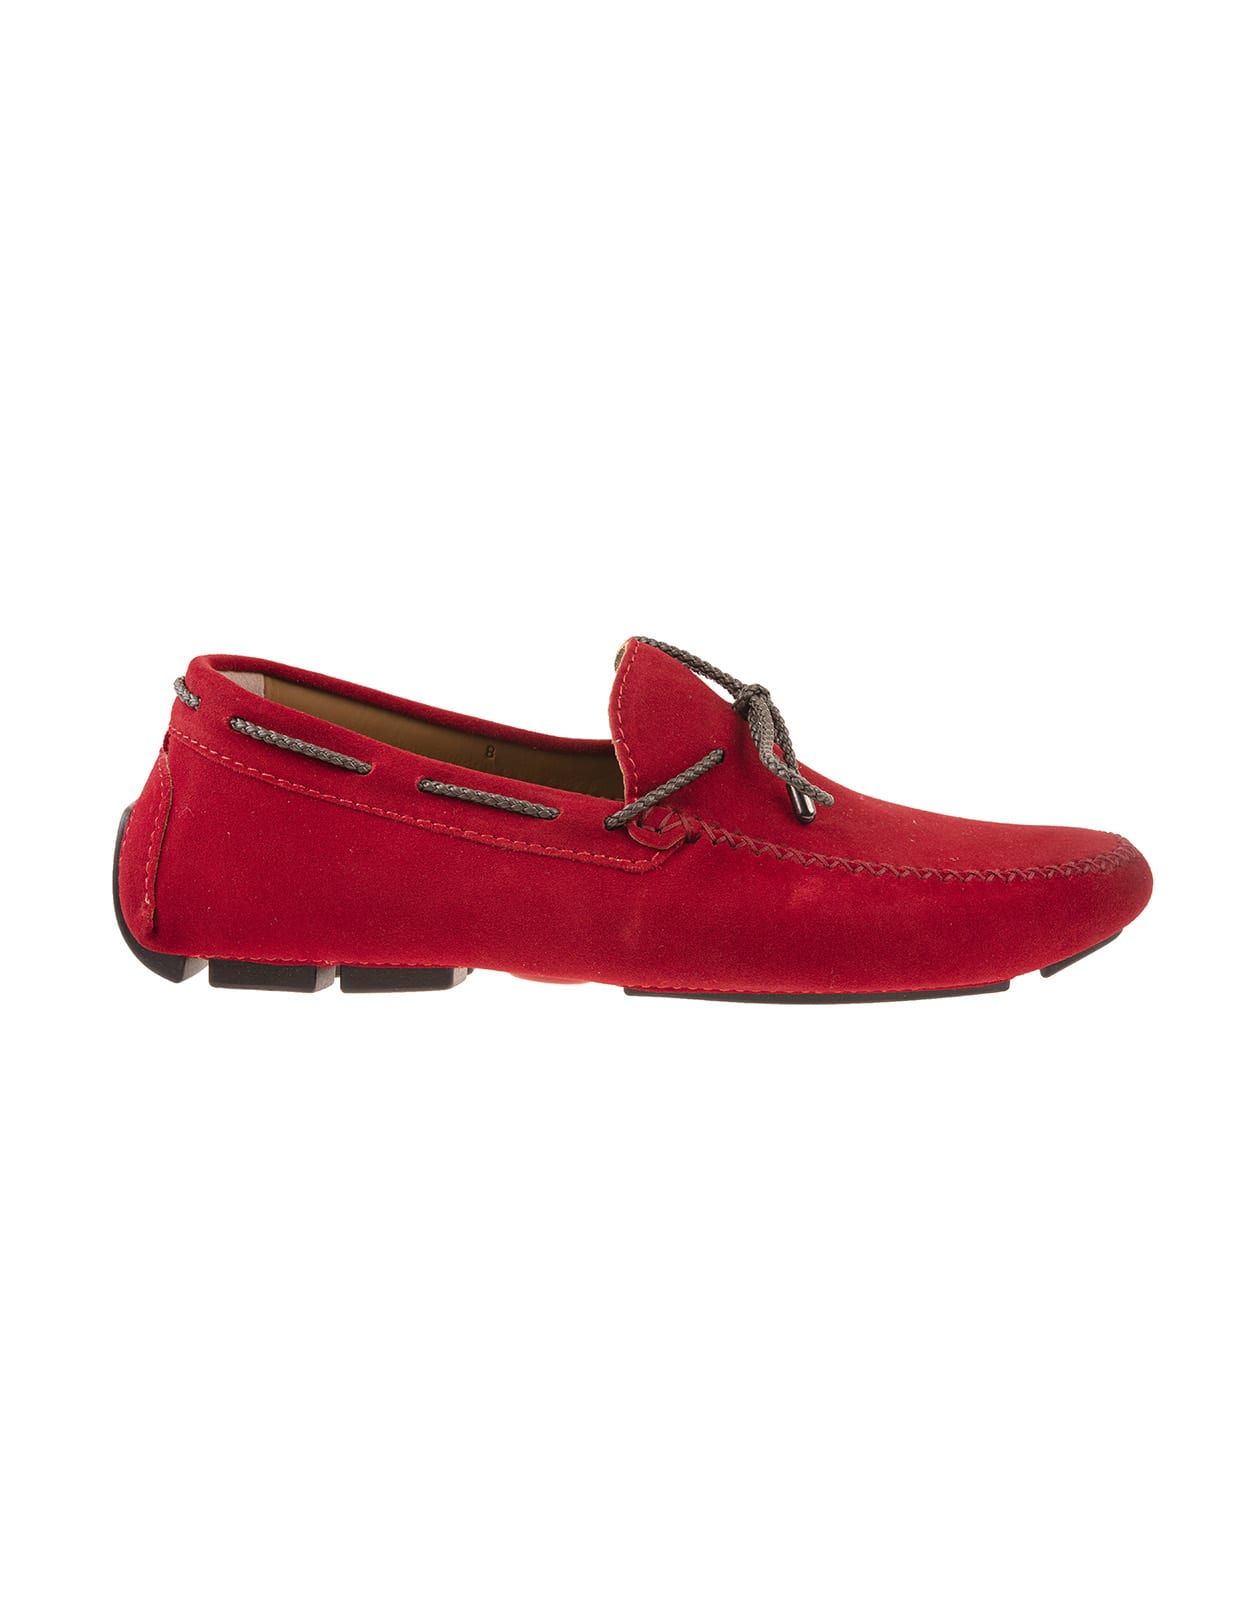 Kiton Red Suede Man Slipper Loafer